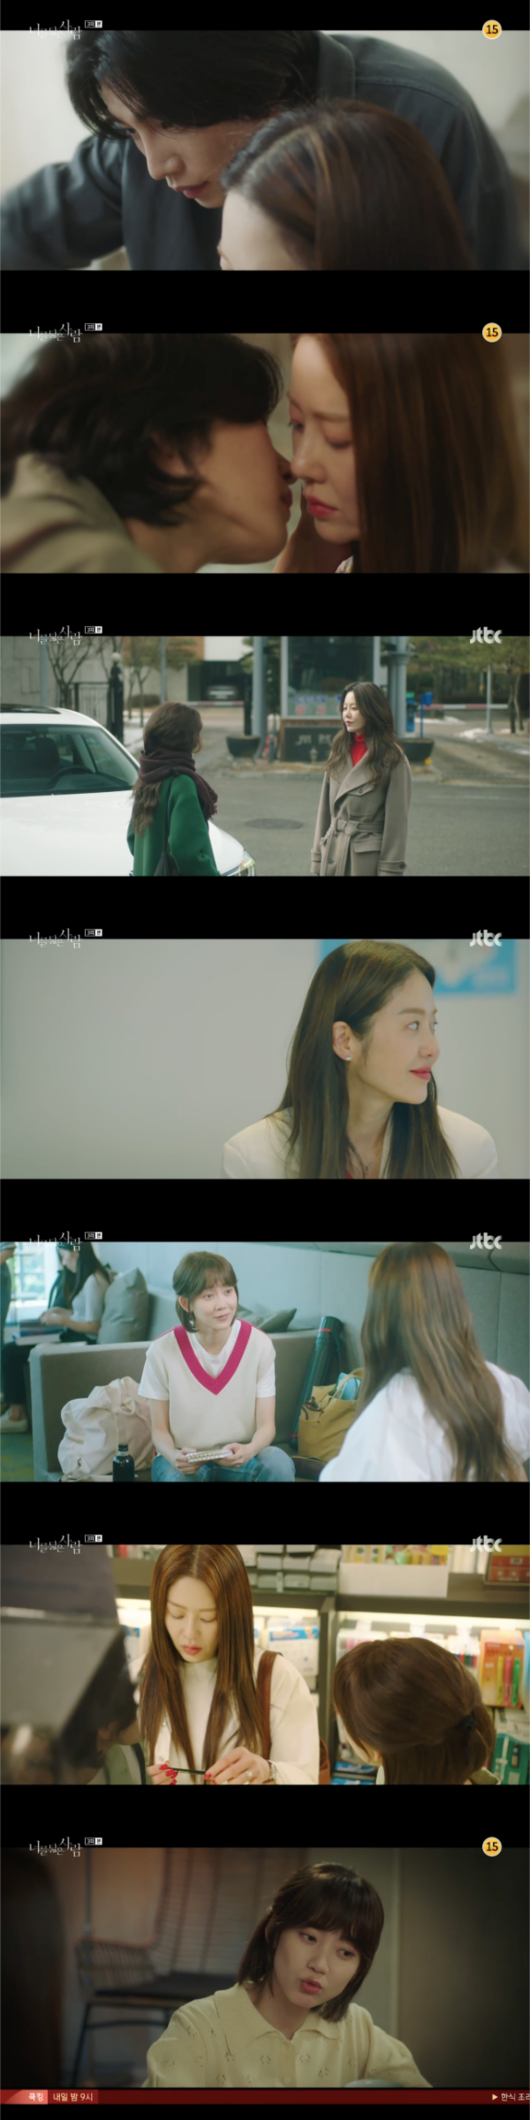 Go Hyun-jung and Jae-young Kim, who resembled you, were infidelity.JTBC Wednesday-Thursday evening drama The Person Who Likes You (directed by Lim Hyun-wook, the play Yubora) broadcasted at 10:30 pm on the 20th revealed the past of Gu Hae-won (Shin Hyun-bin) by Chung Hee-ju.Chung Hee-ju and Gu Hae-won first met in German classes at the academy in the past. The Gu Hae-won approached Chung Hee-ju first and asked, Why are you an actor in German?Chung Hee-ju replied, I thought my family members could not read it.Then what do you do not understand anything, but Im embarrassed, he said. The rescuer said, I have to be sold. Chung Hee-ju, who was lonely due to the study of his daughters and daughters in his family, came close to the rescue sea.Chung Hee-ju told Koo Hae-won, who is studying enthusiastically, It is beautiful to be fierce. Koo Hae-won said, I envy what is fierce.Its the most fun thing to do with Actor as a hobby.Chung Hee-ju looked at the art tools of the Guhaewon and asked, Are you a beauty student? The Guhaewon replied, Yes, I go to school under Namsan.Chung Hee-ju said, Its cool. I liked to draw when I was a child. I also had a flashlight at night and a picture diary.The former seaman painted his daughters face to Chung Hee-ju and said, When you want to do it, you can draw it.Chung Hee-ju told Husband that I seem to be a useless person.He decided to draw a picture at the words of Husband Ahn Hyun-sung (Choi Won-young), who said, Do what you want to do in the remaining time. He bought art tools with the advice of the Gu Hae-won.The two became closer and closer, and Chung Hee-ju hired Koo Hae-won as his art tutor.Then one day, the rescue crew sent a close senior to Chung Hee-jus house, saying that his grandfather was injured. You can take classes from him.The identity of a close senior was Seo Woo-jae (Jae-young Kim).Jung Woo-Jae, who taught Chung Hee-ju to paint, suddenly confessed that the left is more beautiful.Jung Woo-Jae replied, I do not know ... it is very courageous, in Chung Hee-ju, who is embarrassed by how to say such a thing.Chung Hee-ju, despite a long time, showed no erasement of Jung Woo-Jae; dreamed of having a happy time together and was confused when he woke up.At the end of the broadcast, the second son Lake of Chung Hee-ju was born between Jung Woo-Jae, revealing the reversal, raising expectations for future development.JTBC Wednesday-Thursday Evening Drama Captures a Screen of People Like You